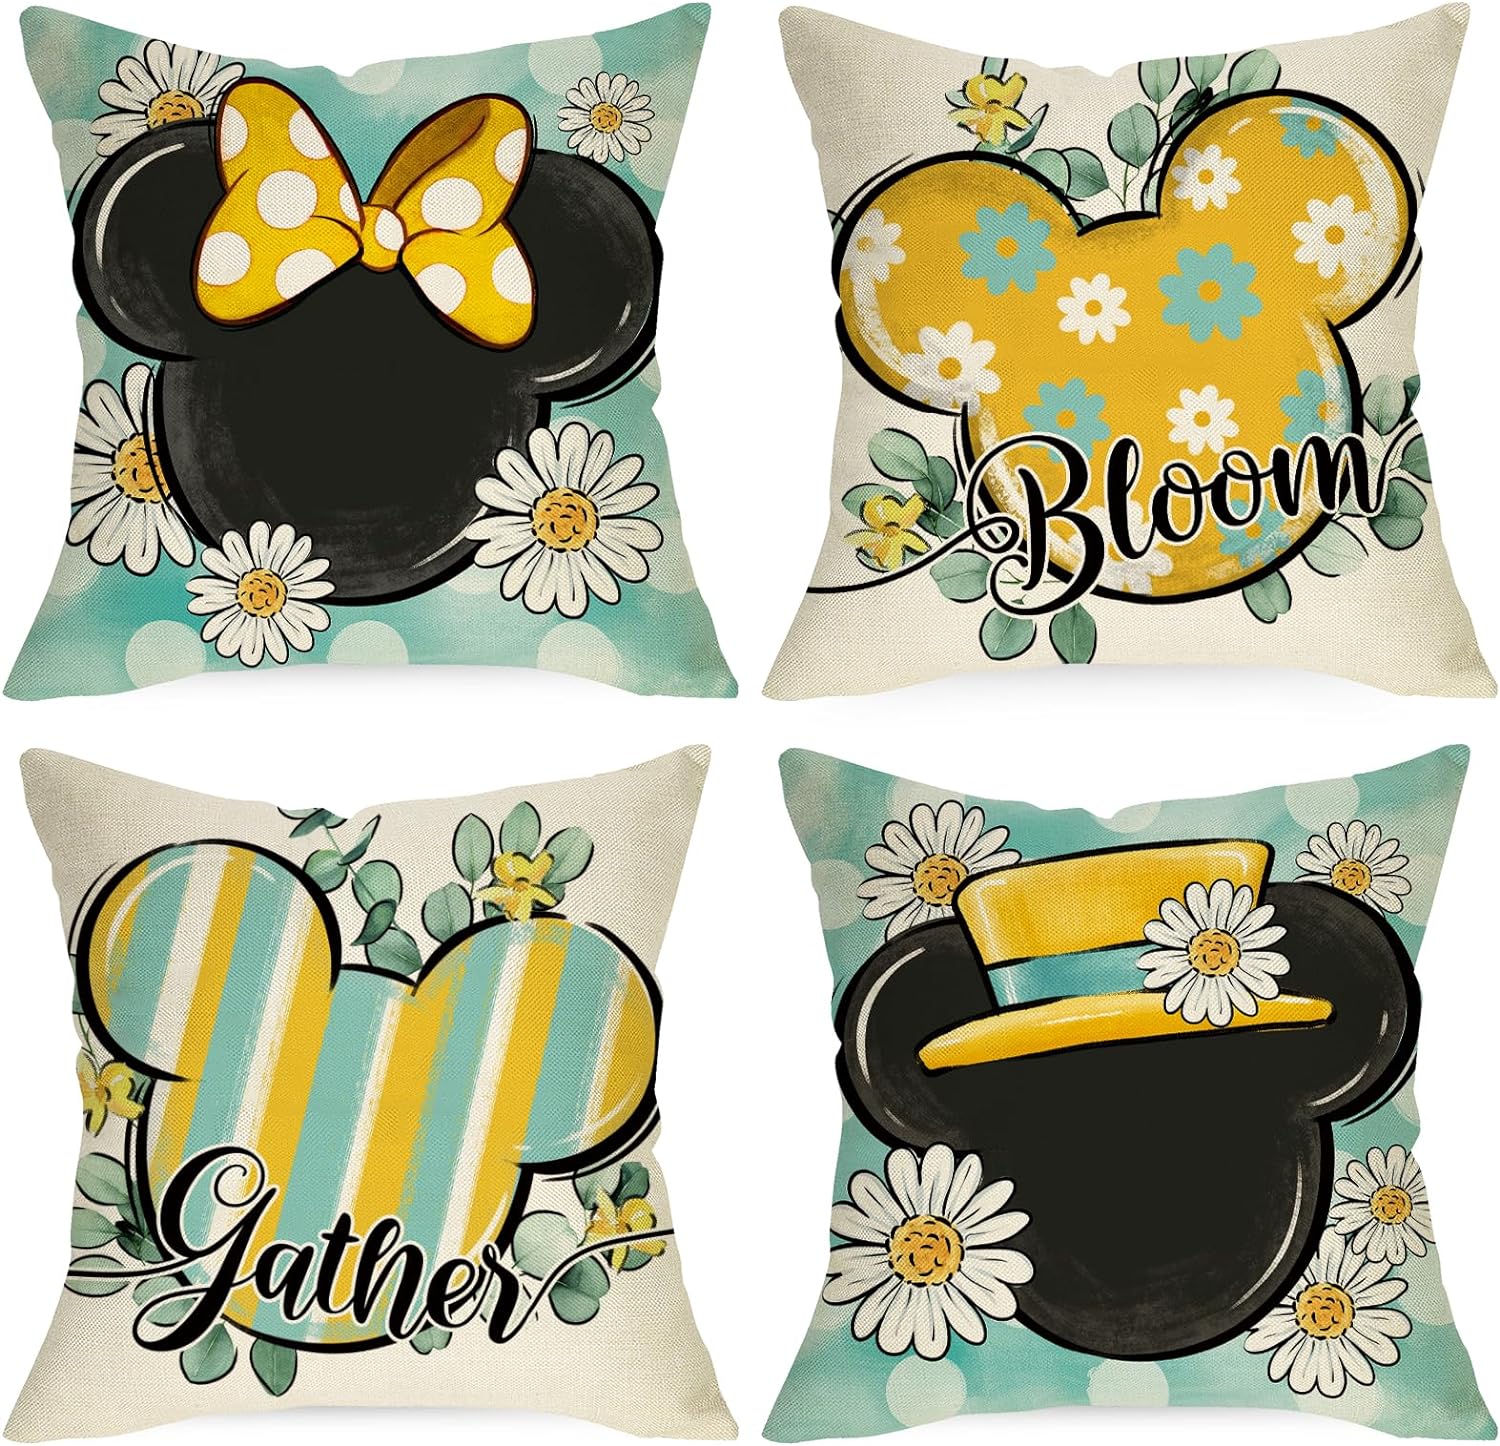 Spring Cartoon Mouse Decorative Throw Pillow Covers 18 x 18 Set of 4, Daisy Flower Eucalyptus Leaves Bloom Gather Cushion Case Decor, Teal Yellow Stripes Polka Dot Home Decoration for Sofa Couch